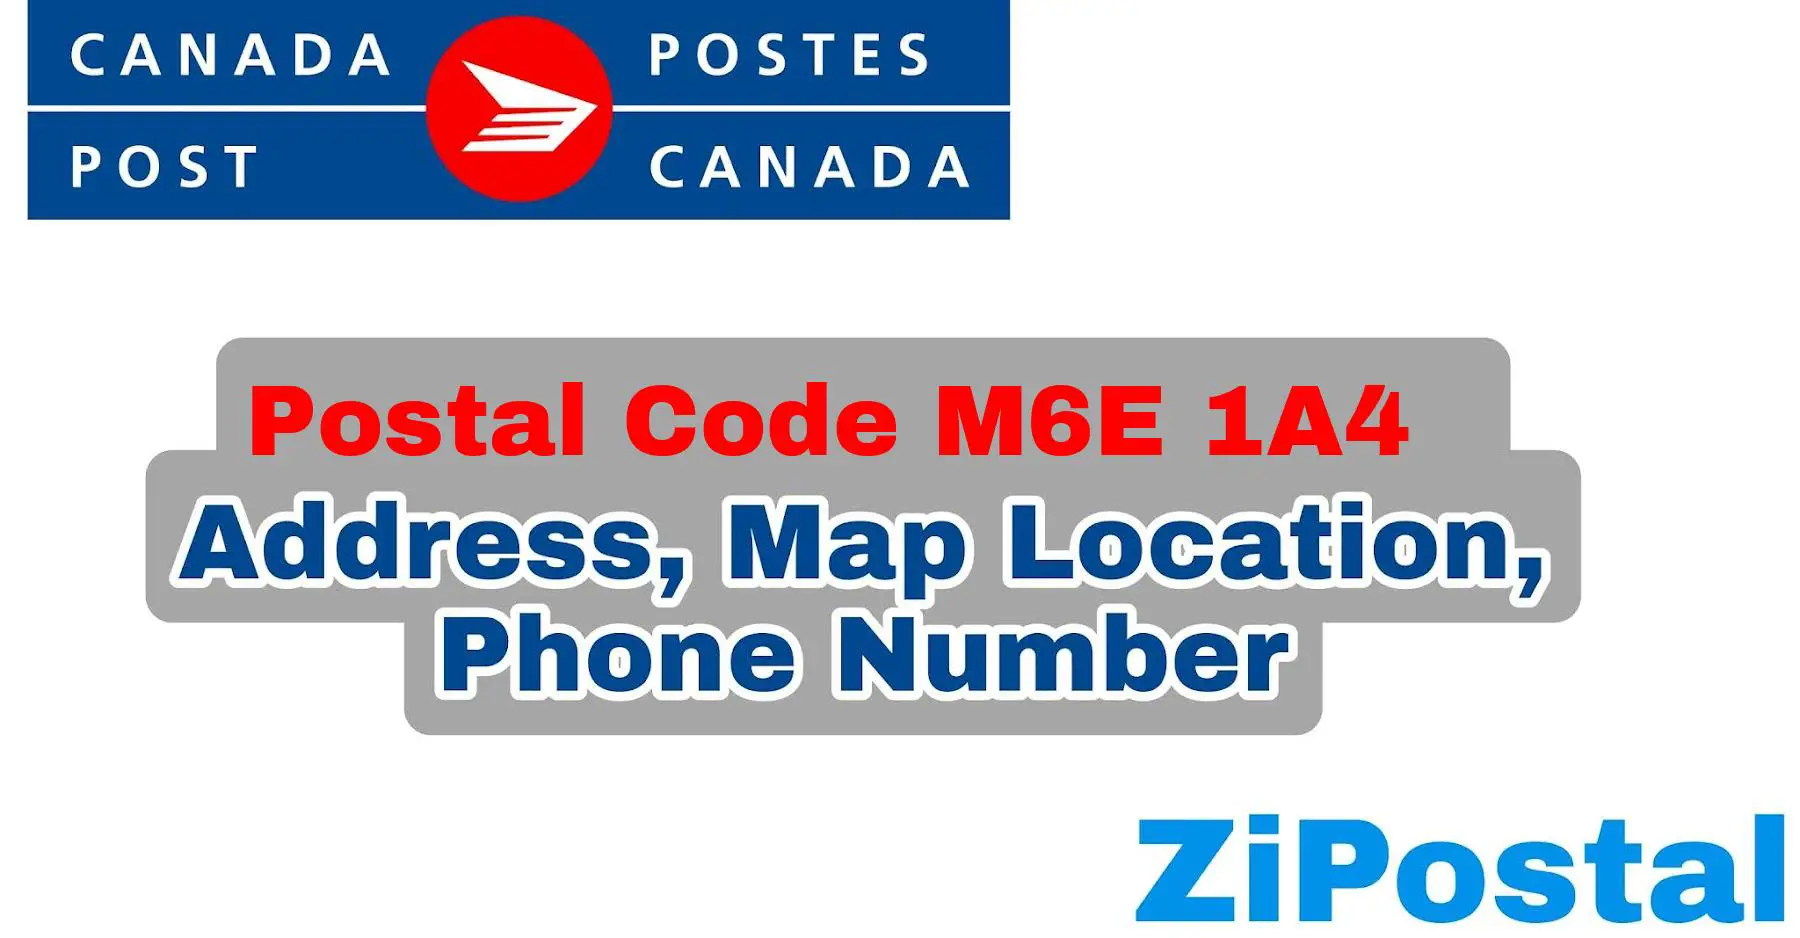 Postal Code M6E 1A4 Address Map Location and Phone Number